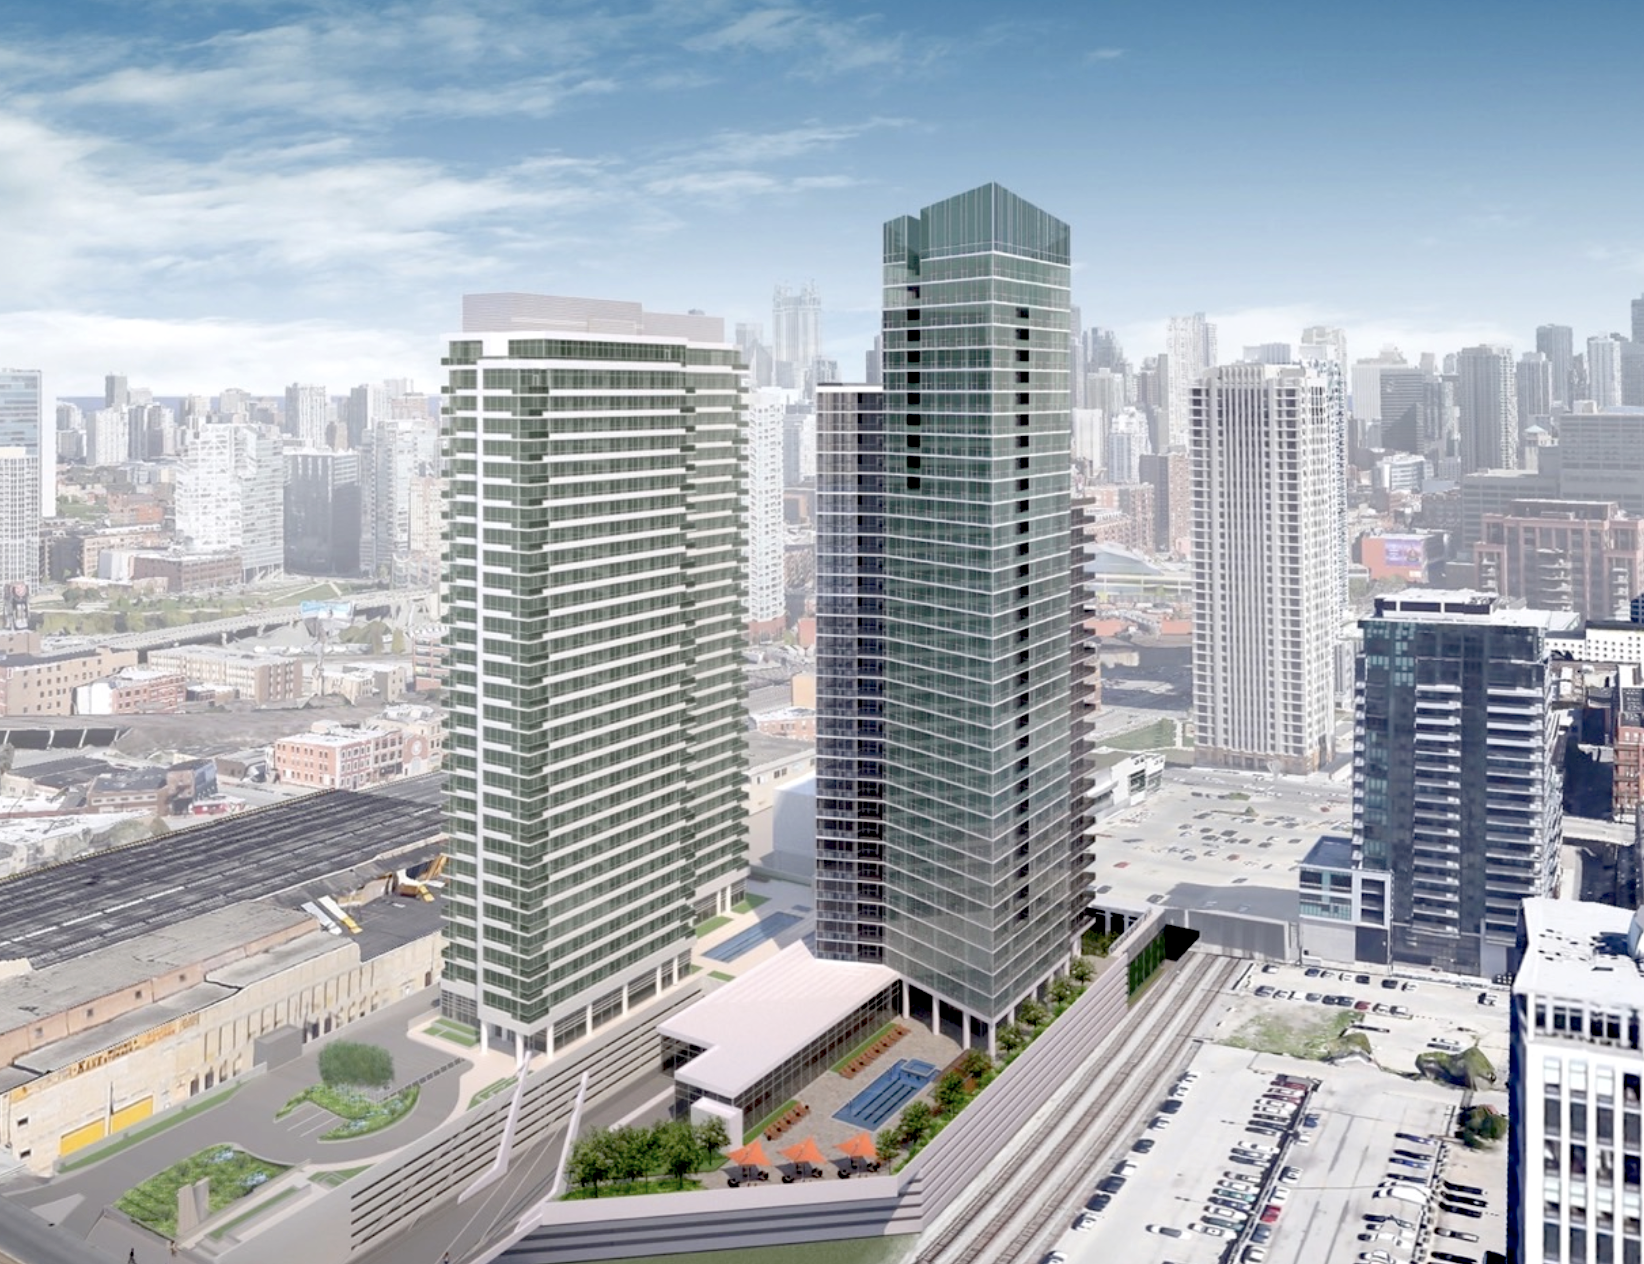 A rendering showing a glassy high-rise tower with an angled crown next to a shorter high-rise. The buildings stand next to train tracks and tall buildings stand in a row in the distance. 